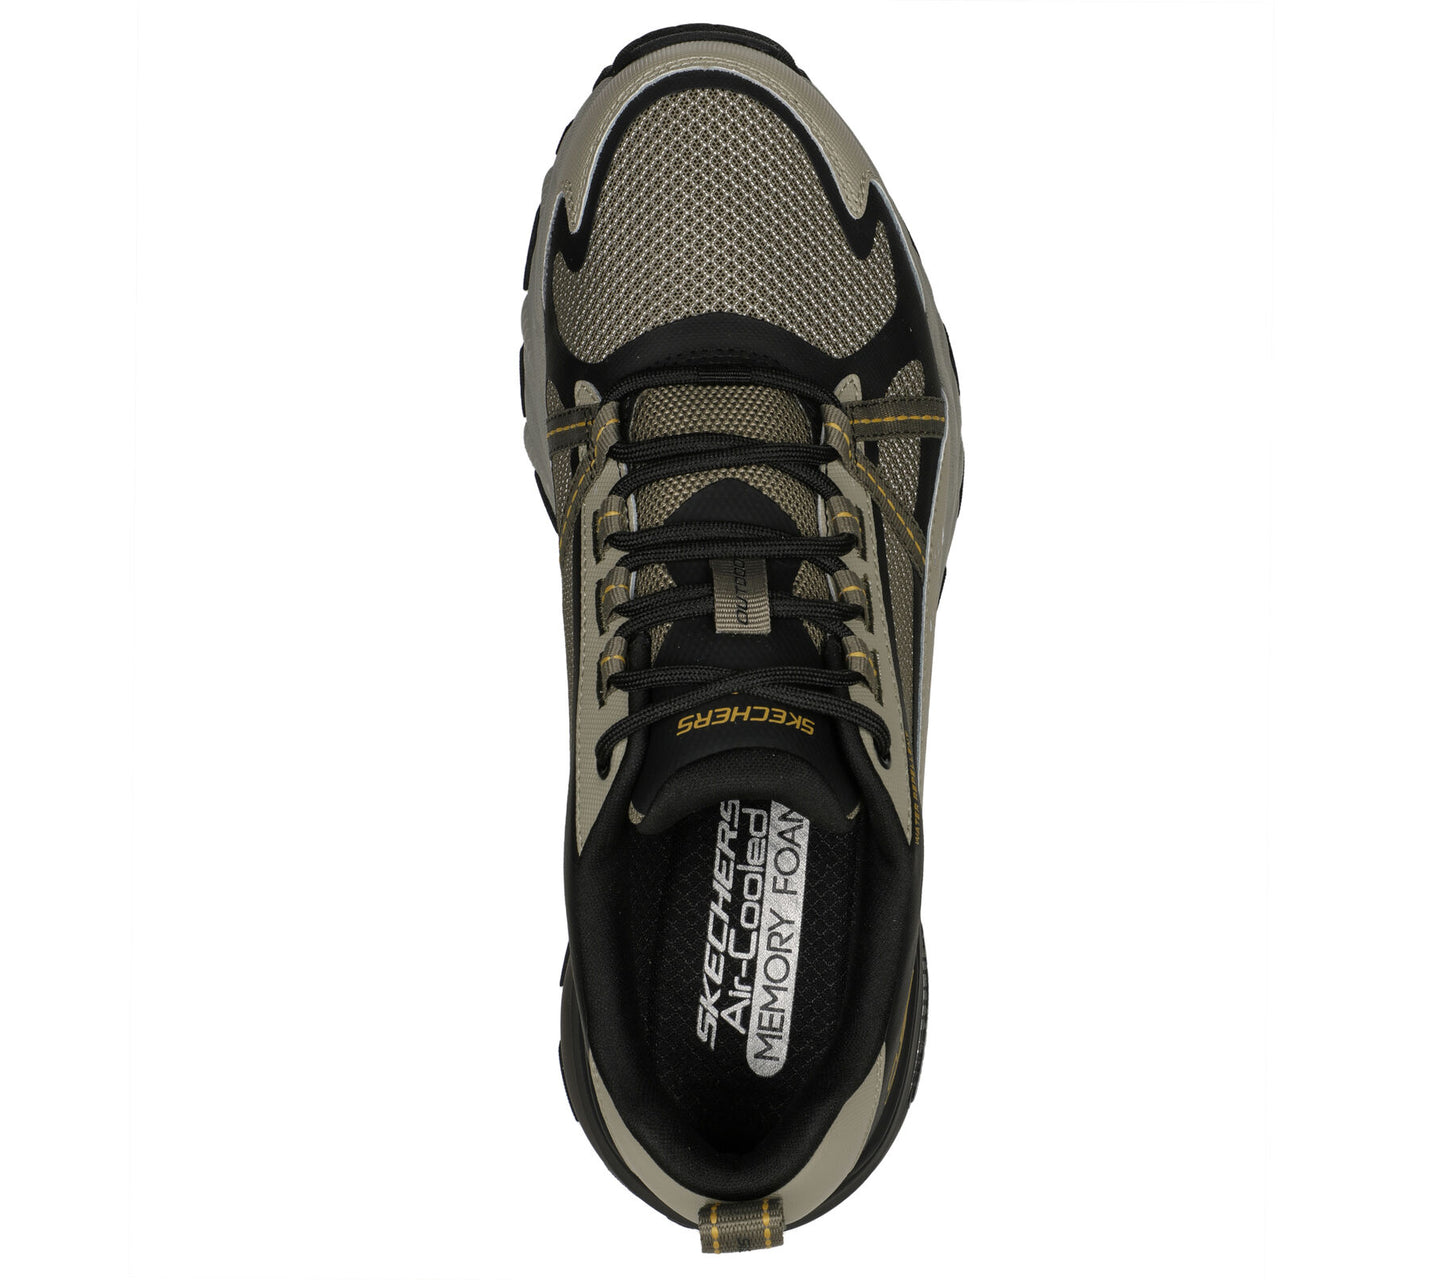 Skechers Max Protect. Hombre